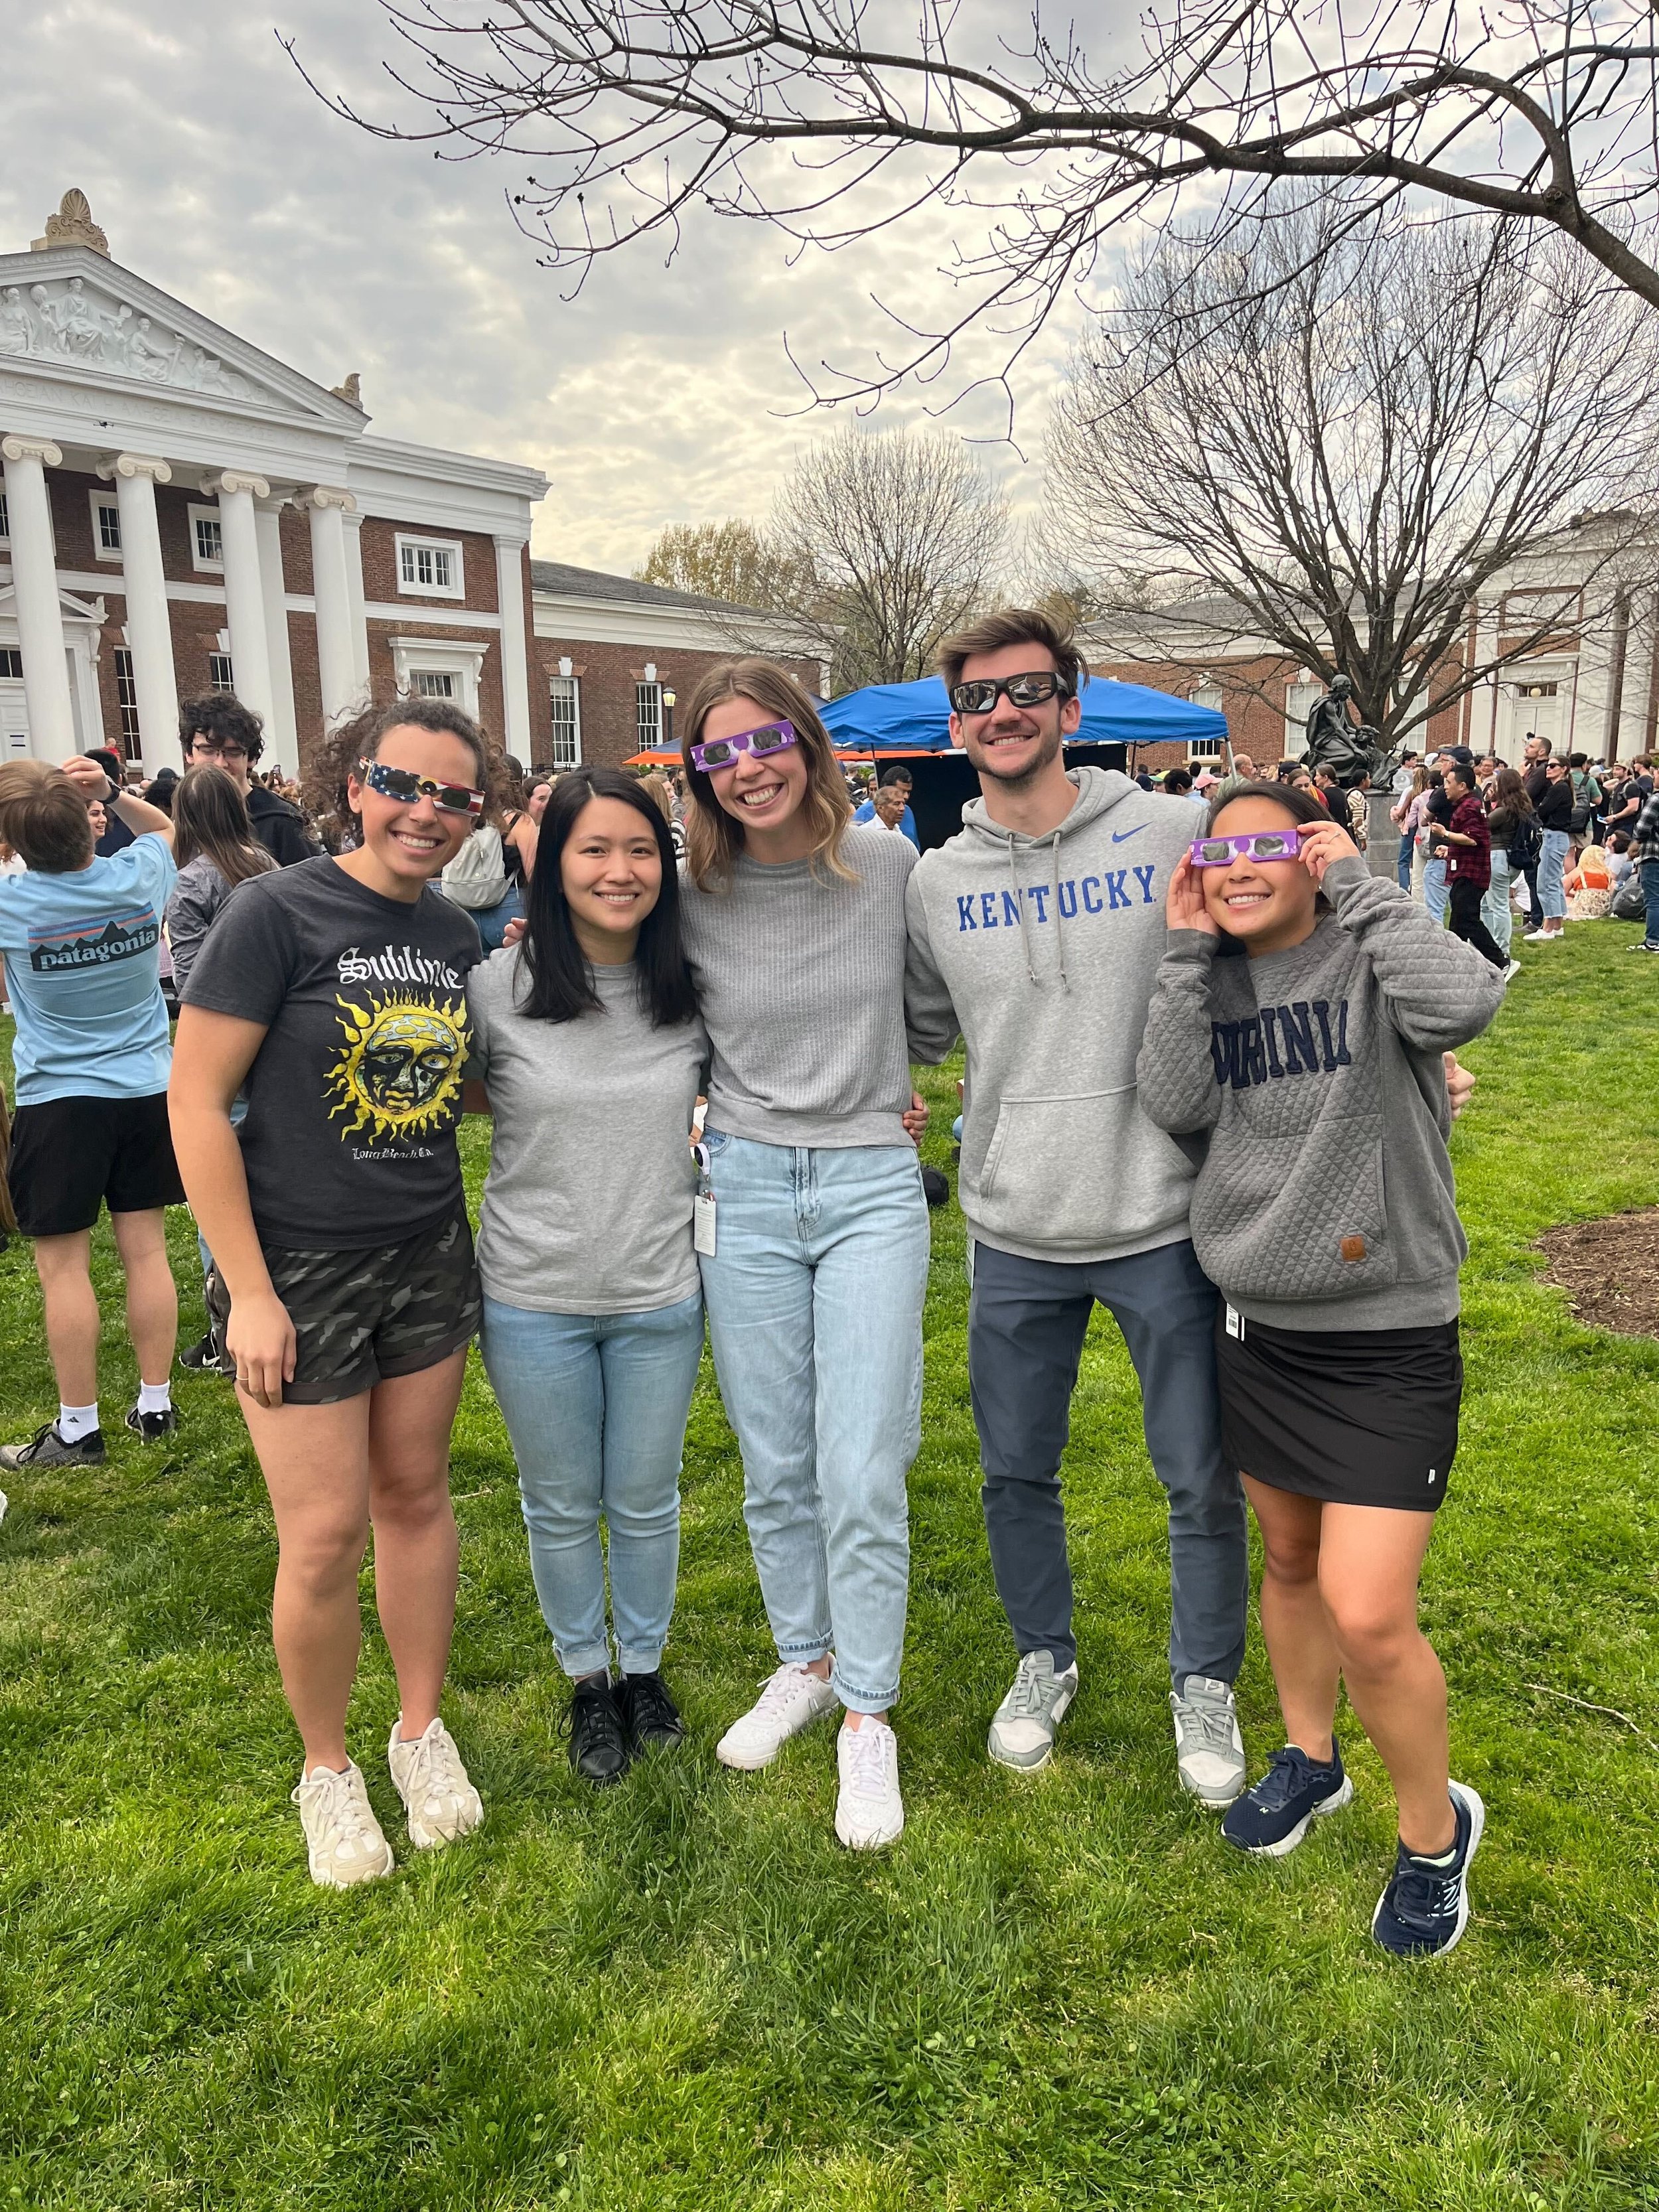 Ava, Jess, Lexi, Ben, and Addie at the UVA lawn viewing event 🌞